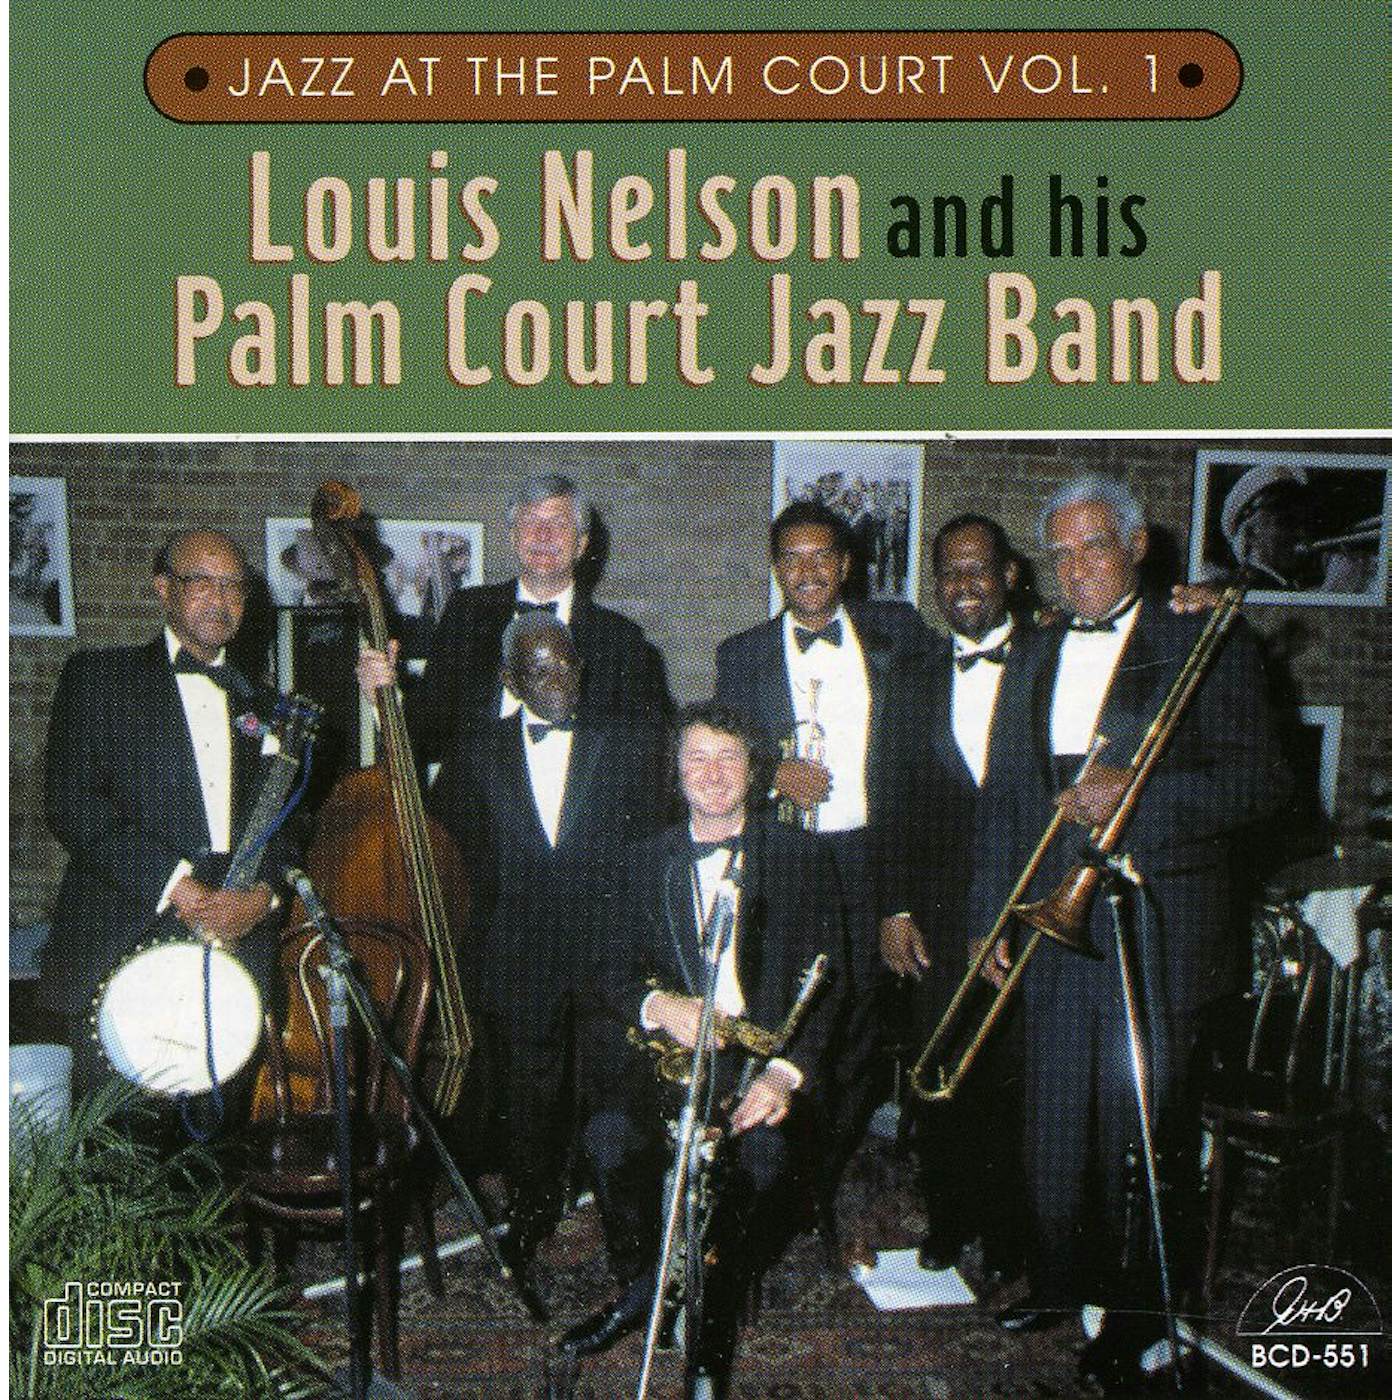 Louis Nelson JAZZ AT THE PALM COURT 1 CD